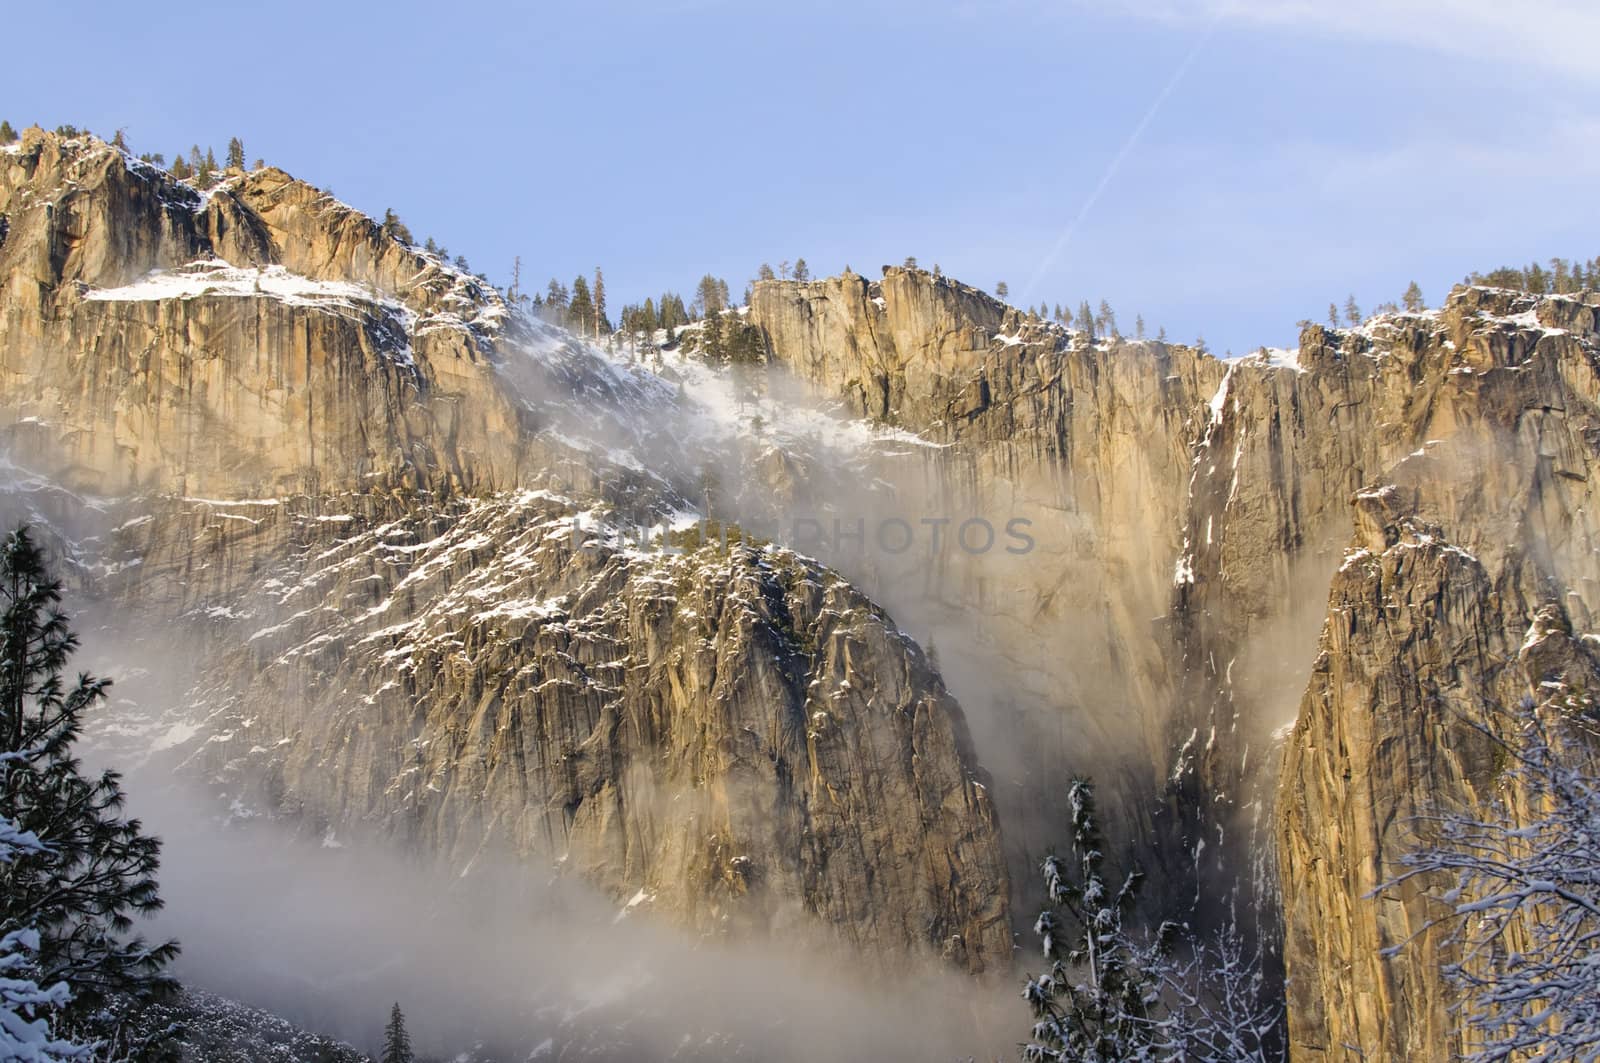 Mist hanging around the peaks of the mountains in Yosemite National Park